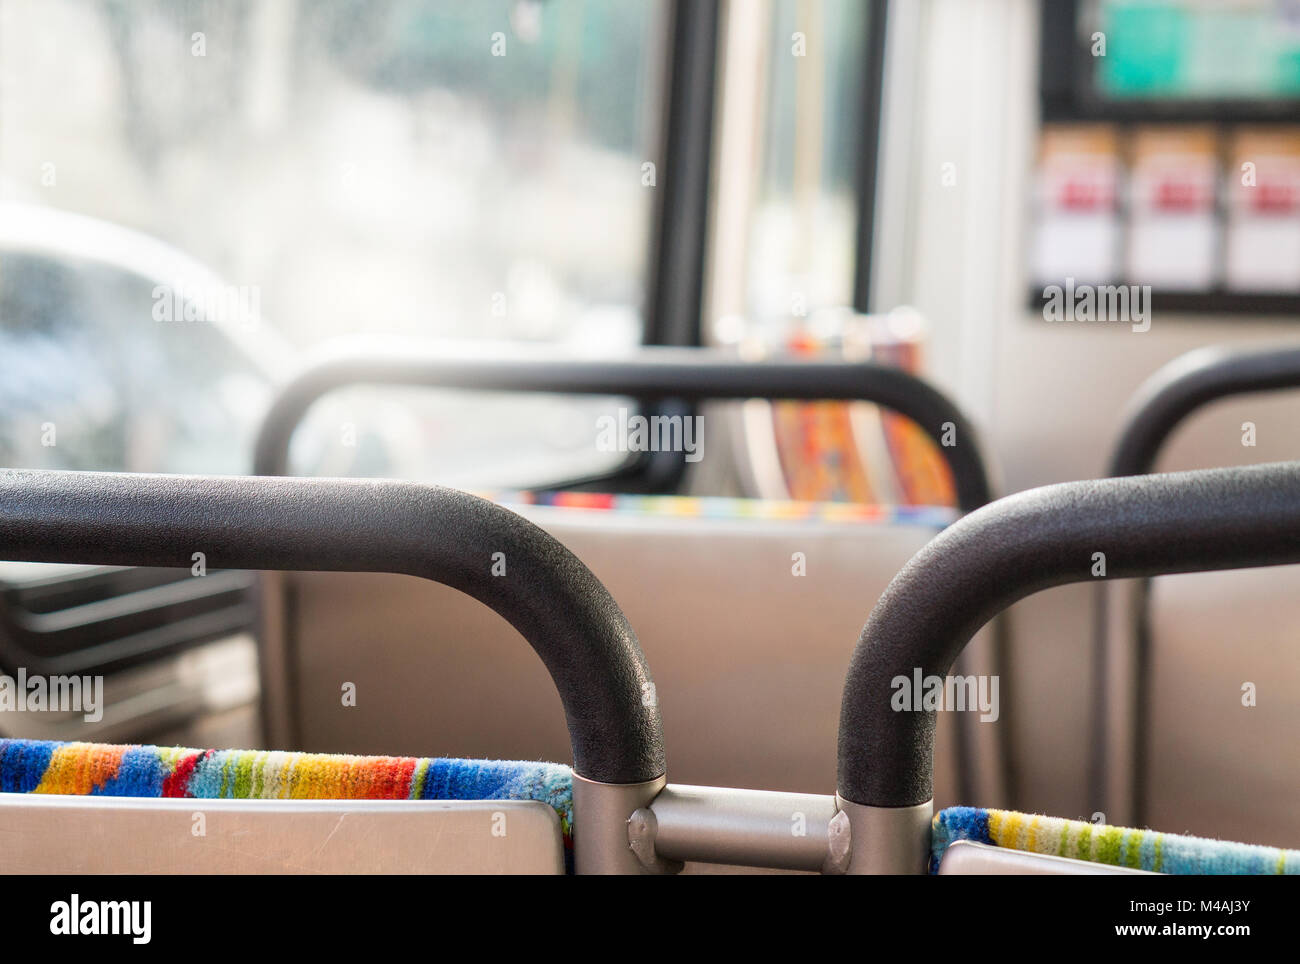 Bus from passengers point ot view. Sitting inside a coach. Public transportation concept with happy vibe. Stock Photo